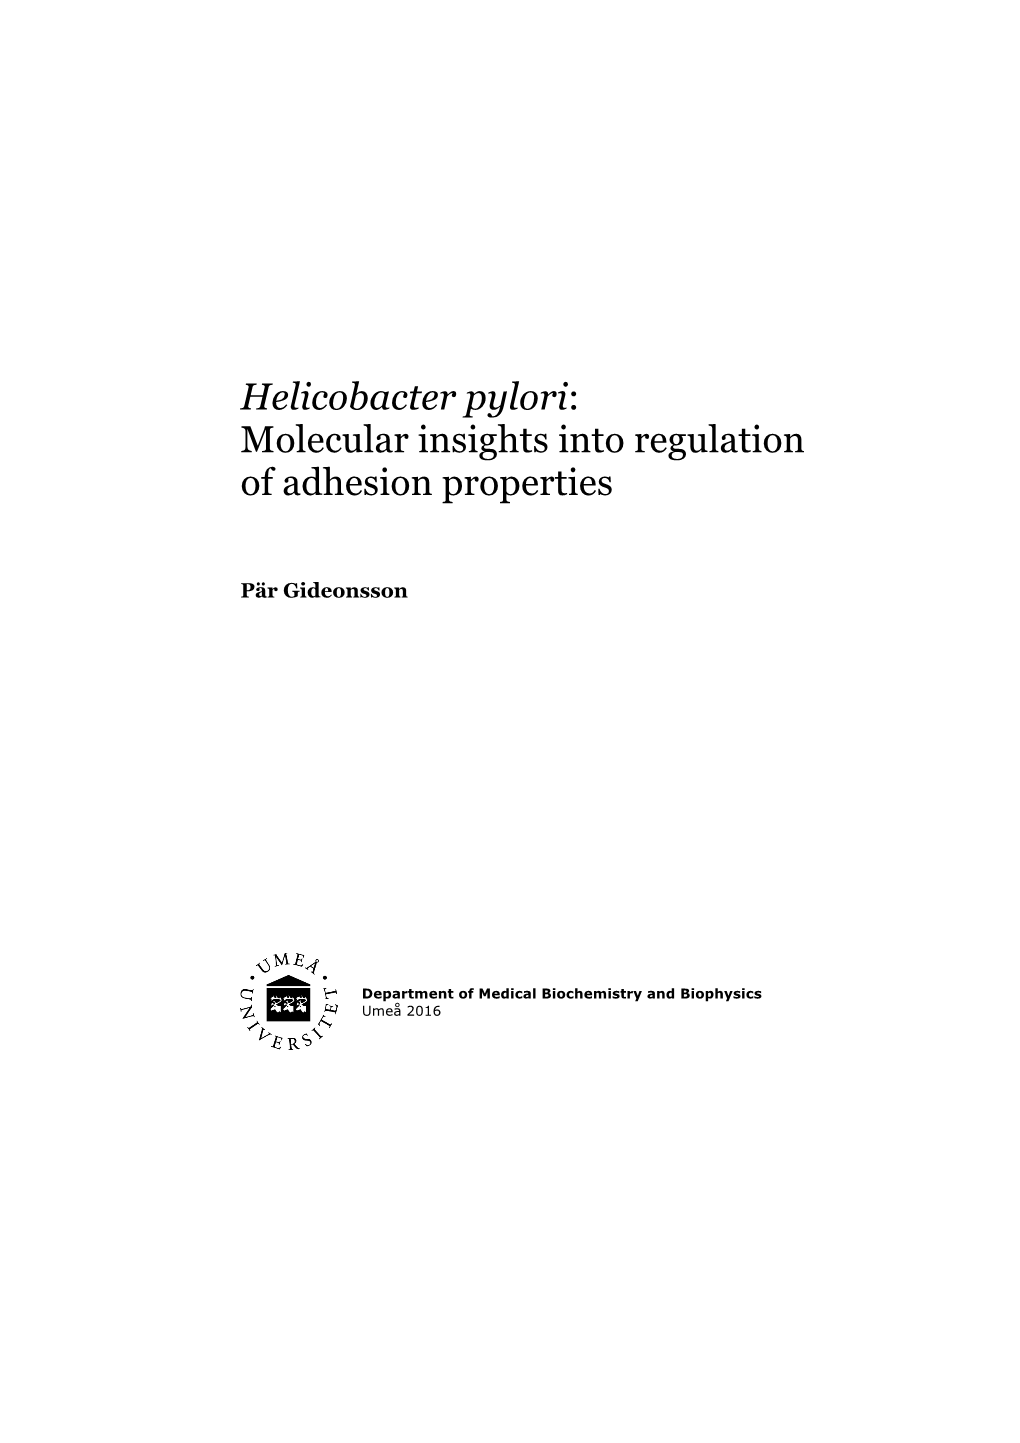 Helicobacter Pylori: Molecular Insights Into Regulation of Adhesion Properties